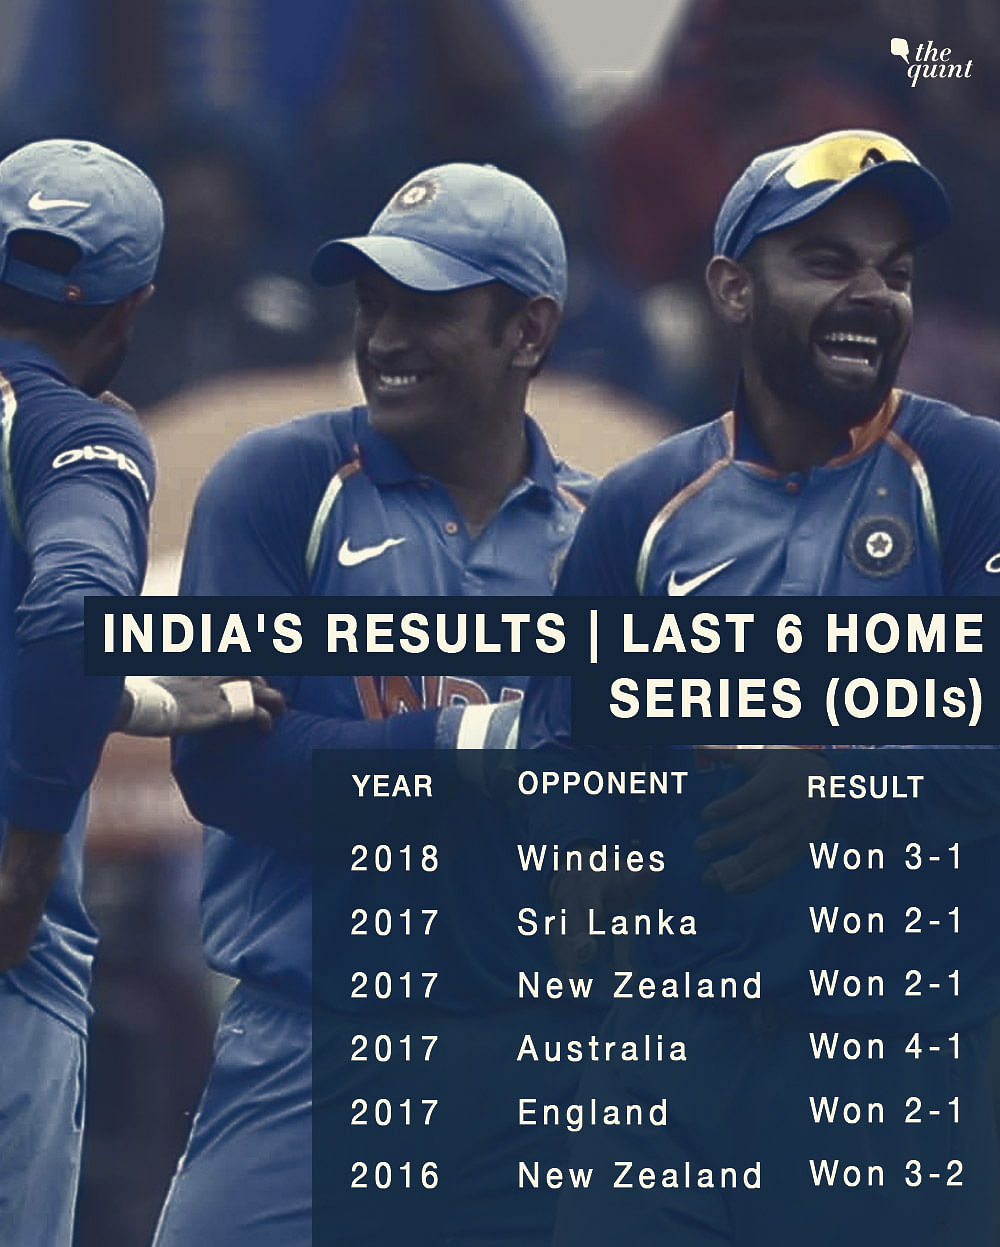 Here’s a look at the numbers and stats from the fifth ODI between India and West Indies.